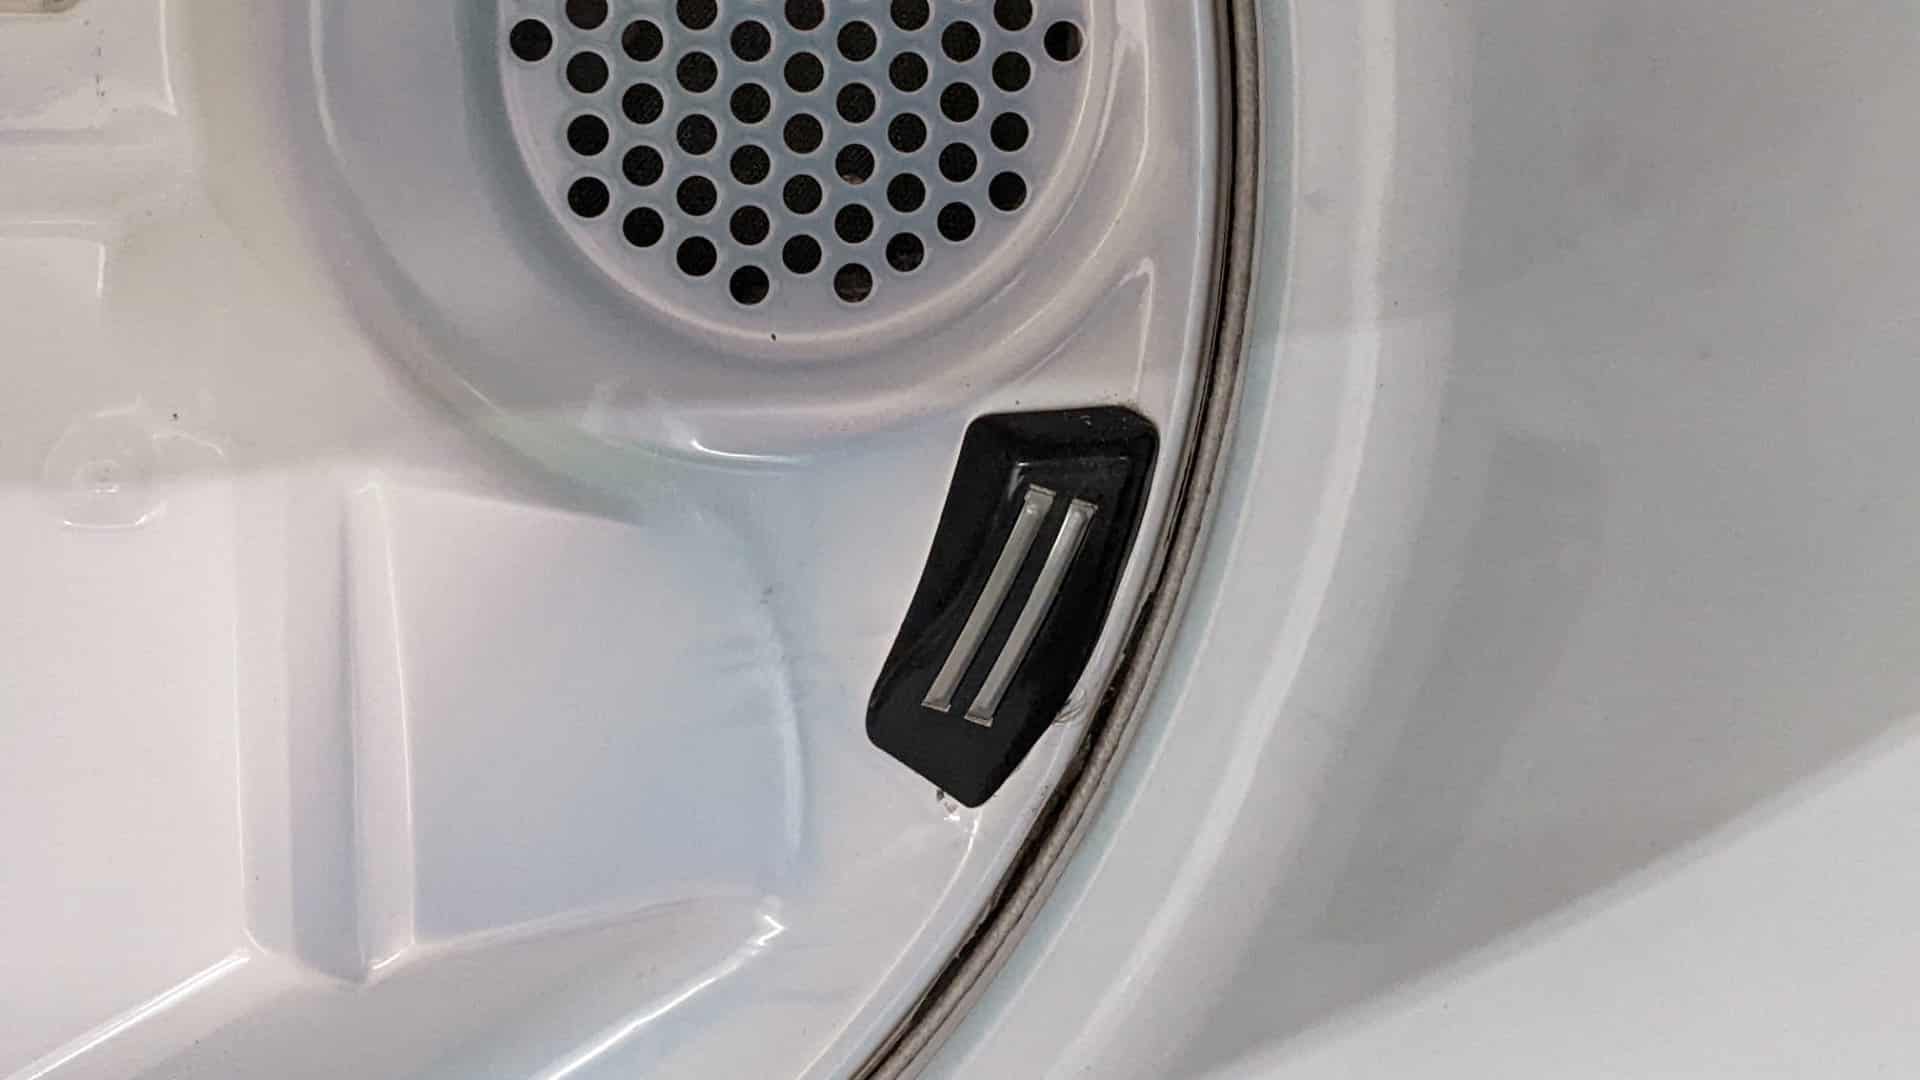 Maytag Bravos Xl Dryer Troubleshooting: Quick Fixes to Revive Your Drying Power